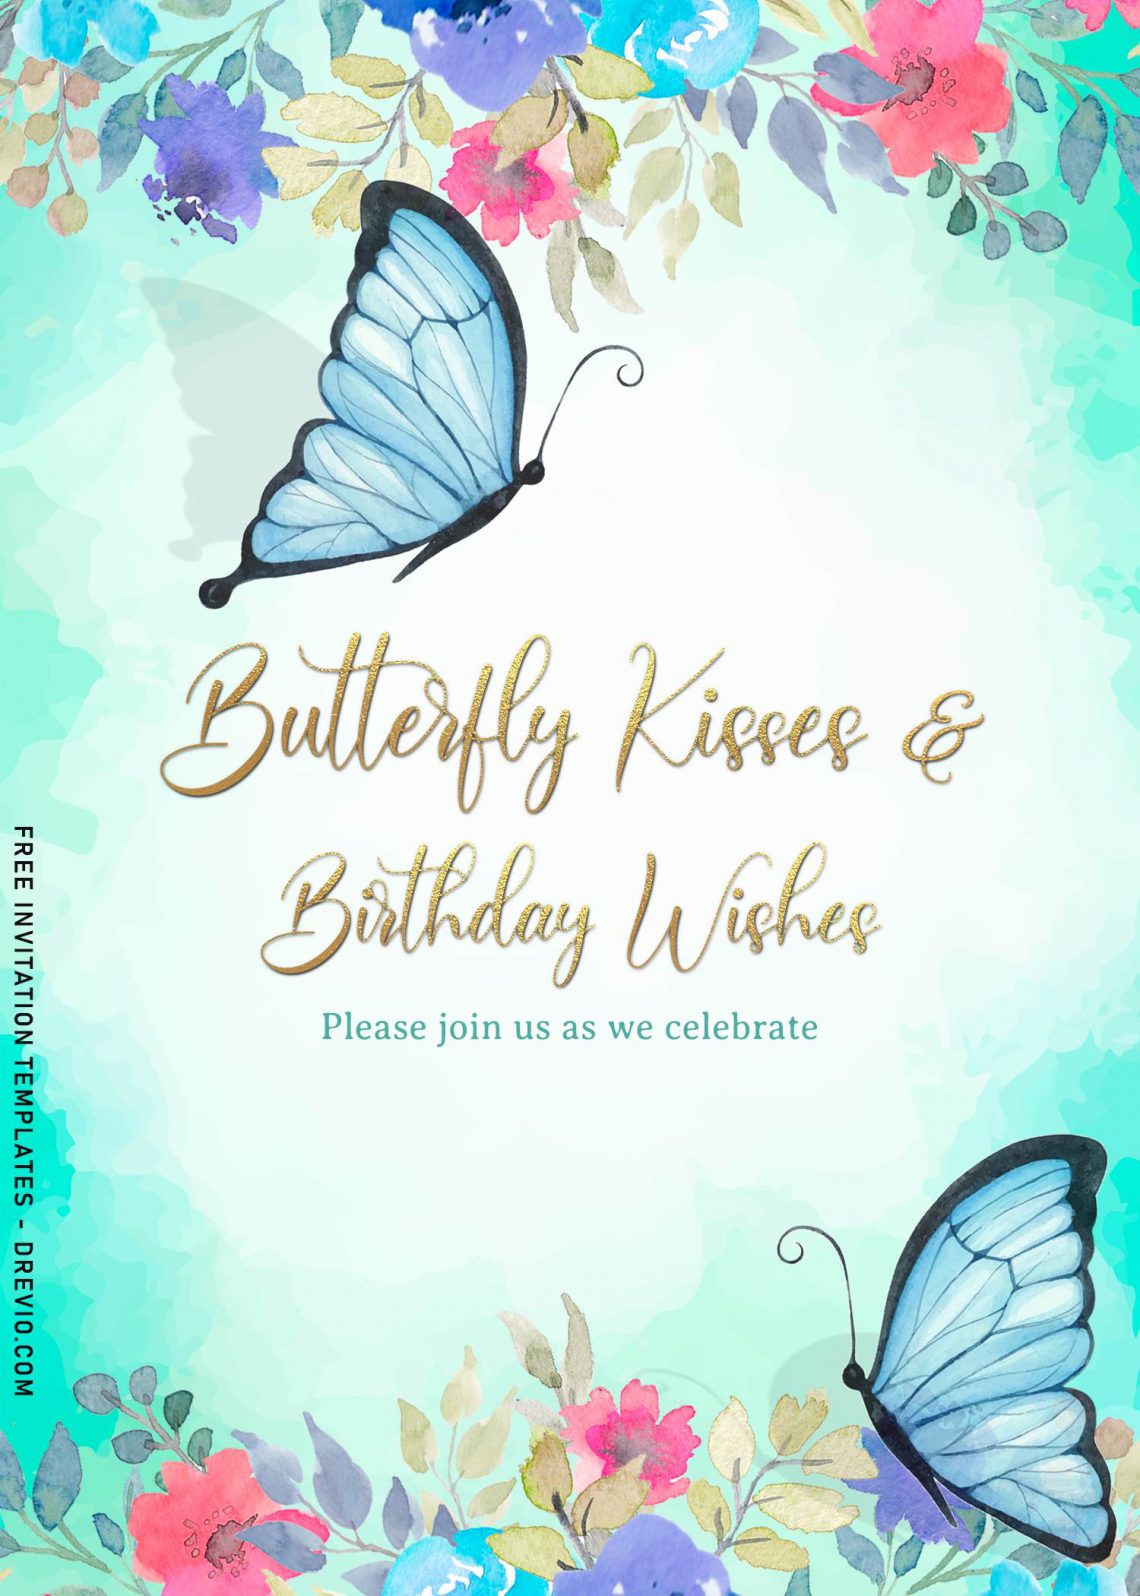 7-watercolor-butterfly-birthday-invitation-templates-for-all-ages-download-hundreds-free